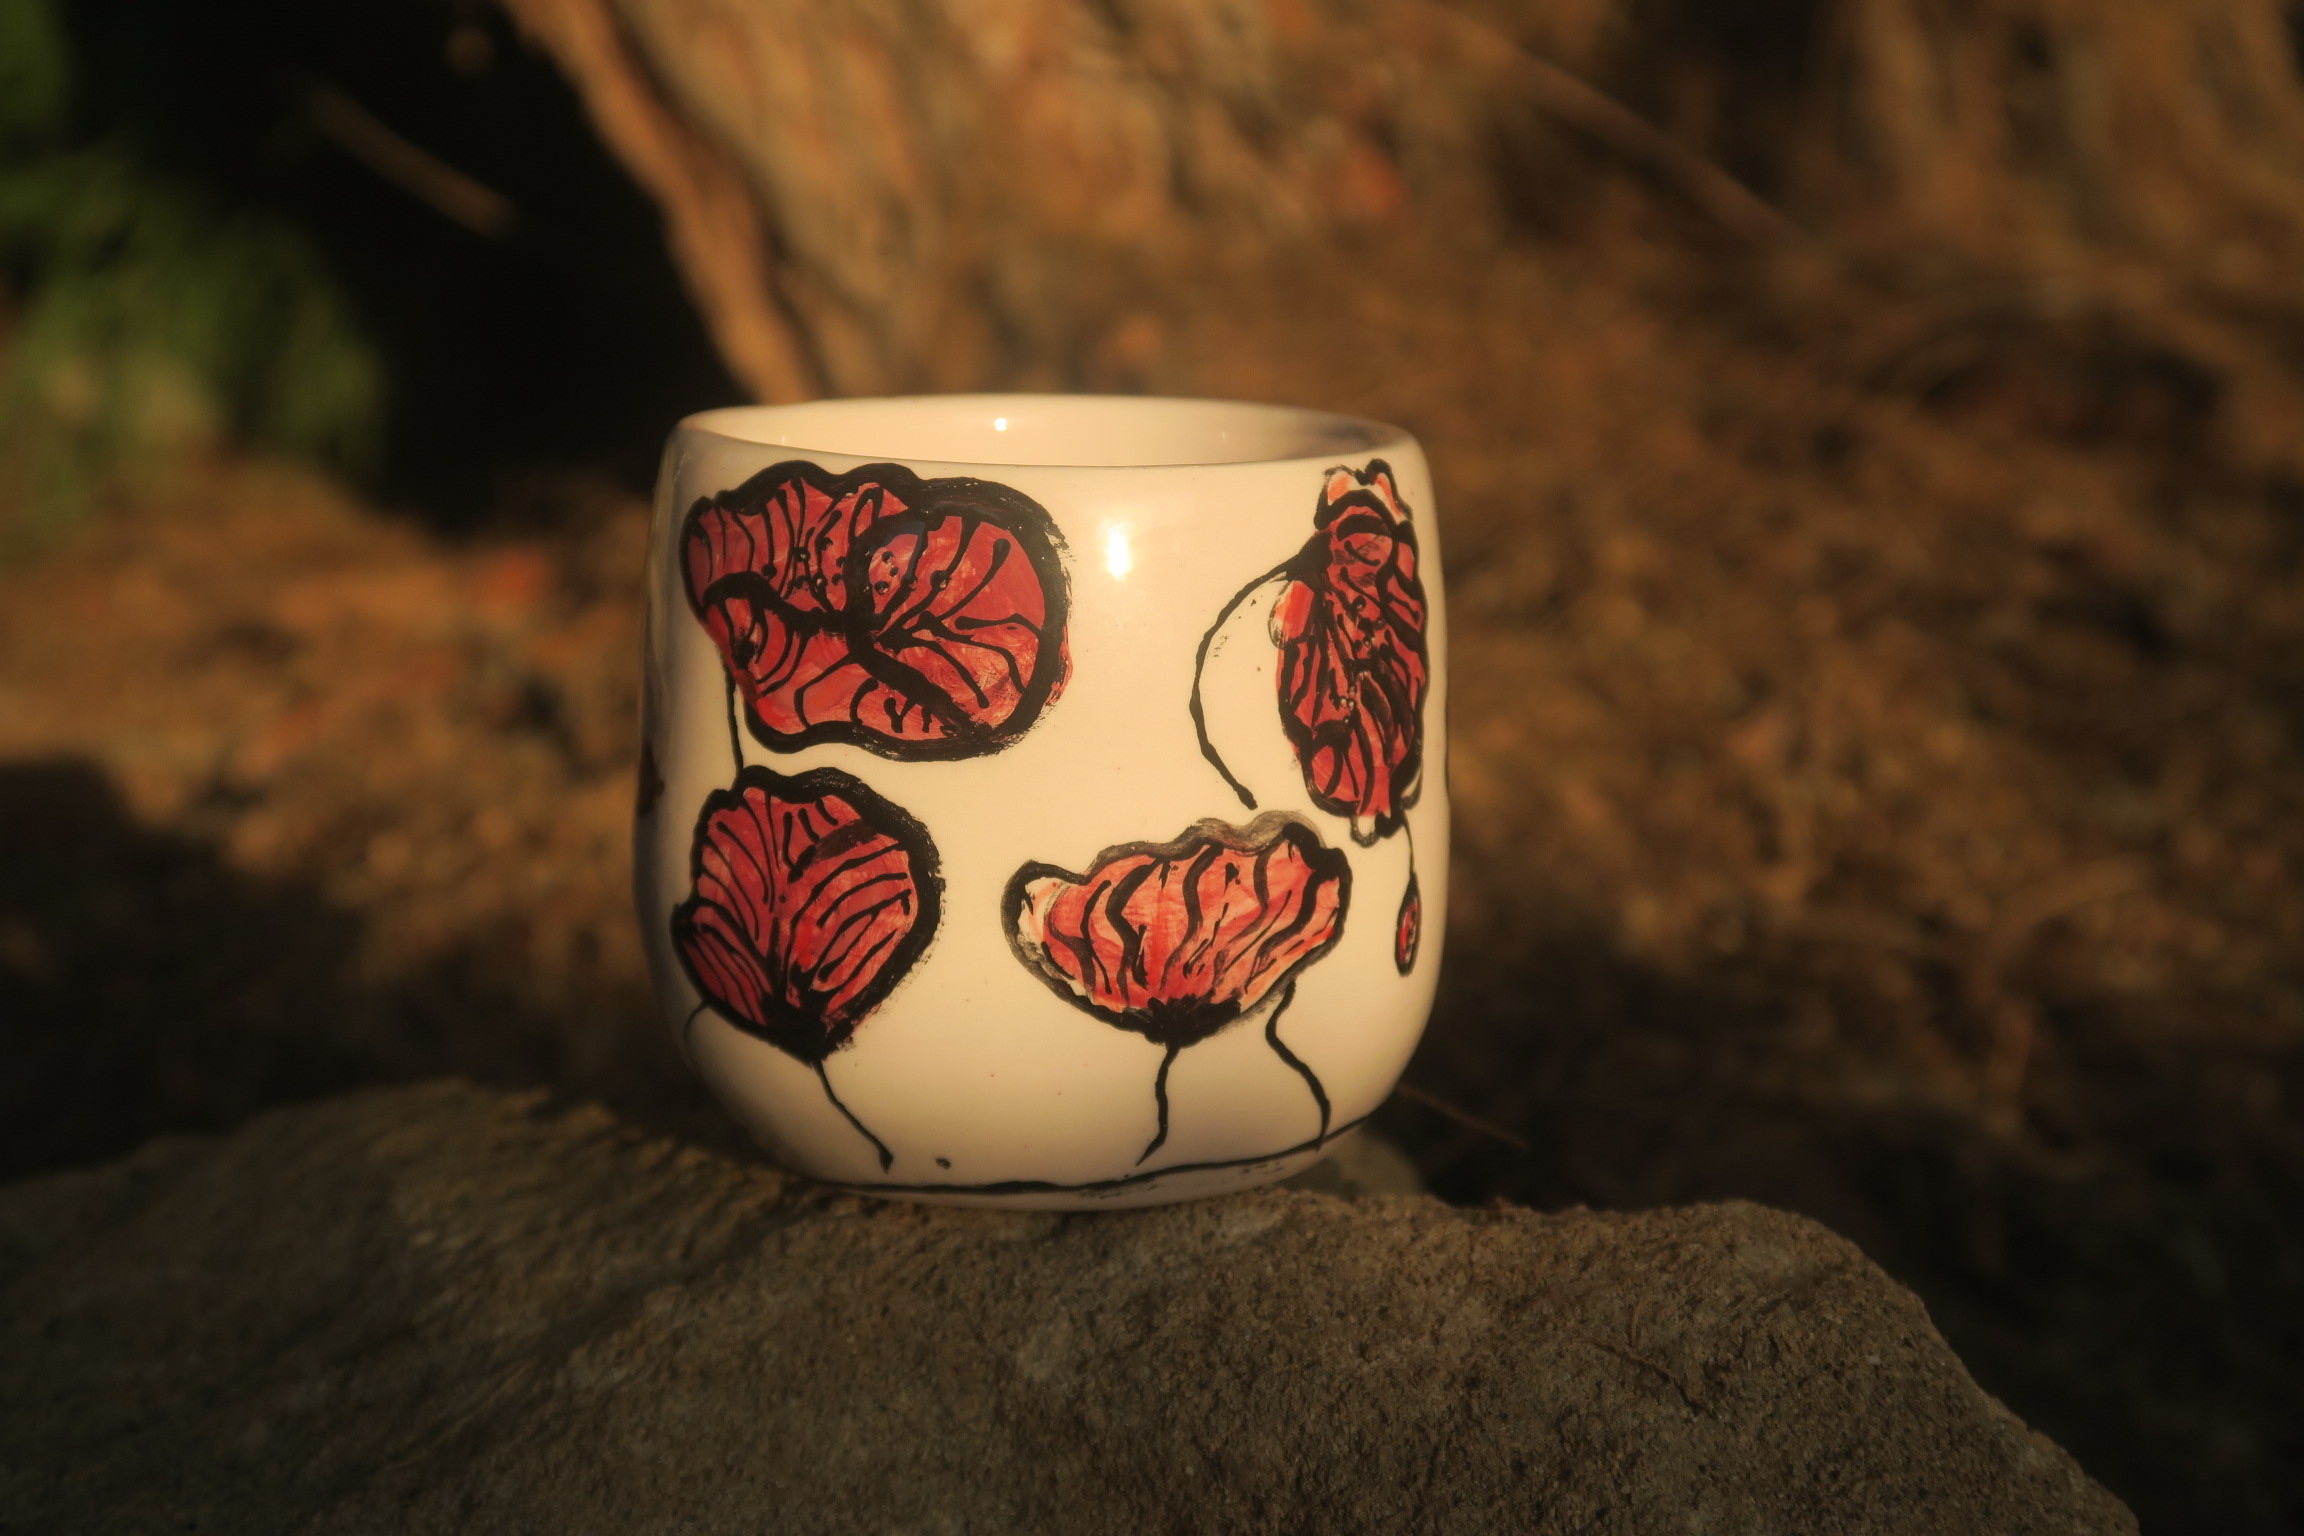 Plinthos Concept - Handmade Ceramics Greece - High quality ceramic collections Cups & Mugs | Plates & Platters | Vases and Jugs